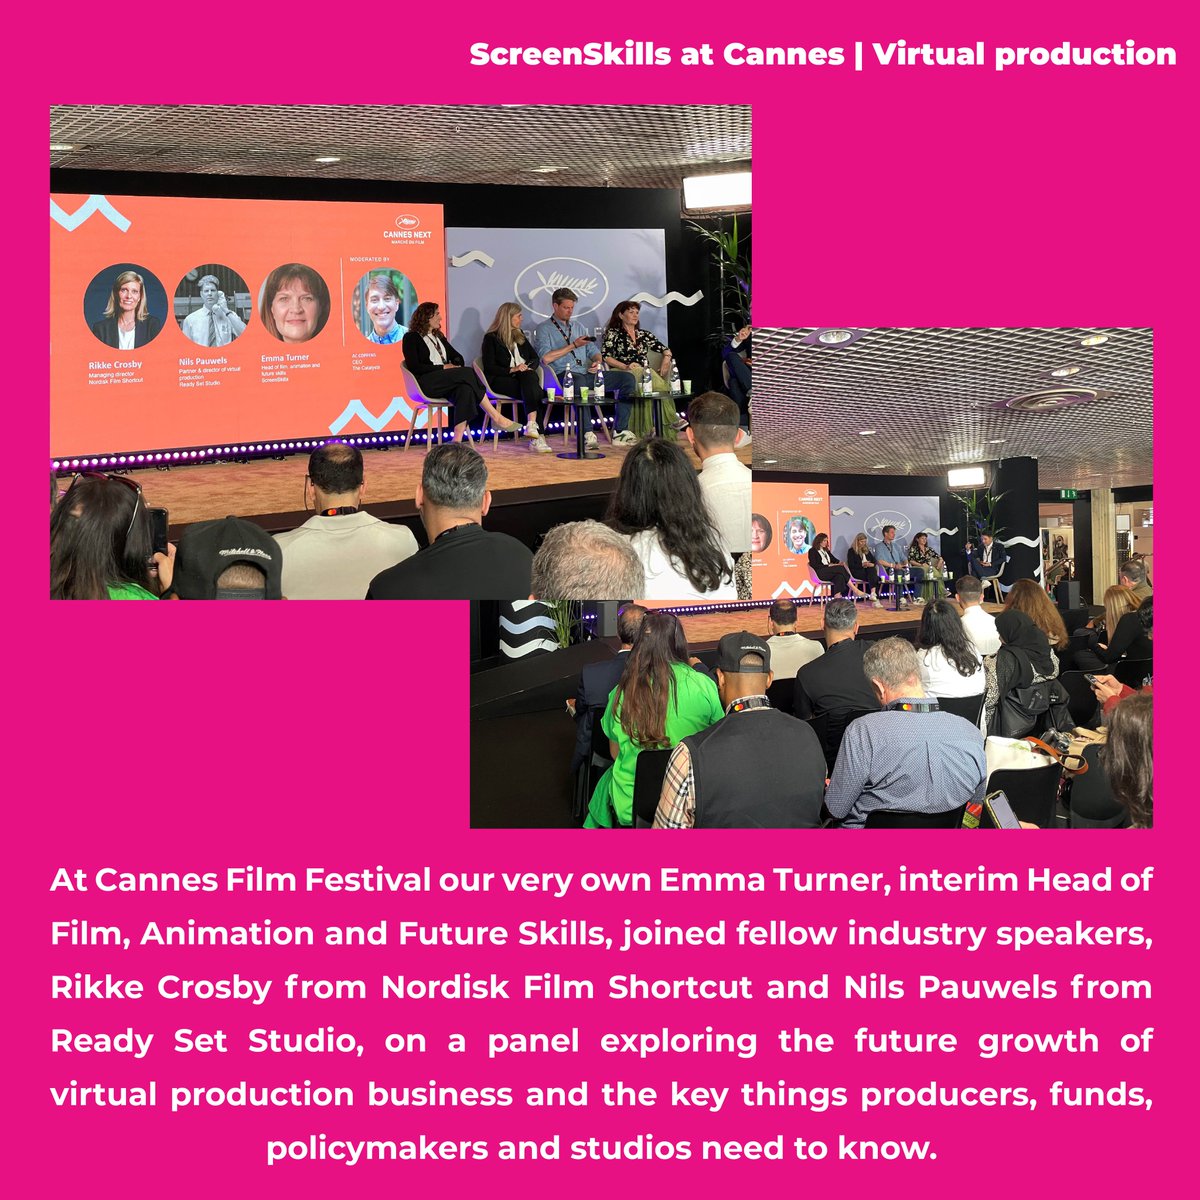 Over in France at #Cannes2023, ScreenSkills' Emma Turner, interim Head of Film, Animation & Future Skills, joined fellow industry leaders, Rikke Crosby from #NordiskFilmShortcut and Nils Pauwels from #ReadySetStudio, on a panel exploring the exciting growth of #virtualproduction